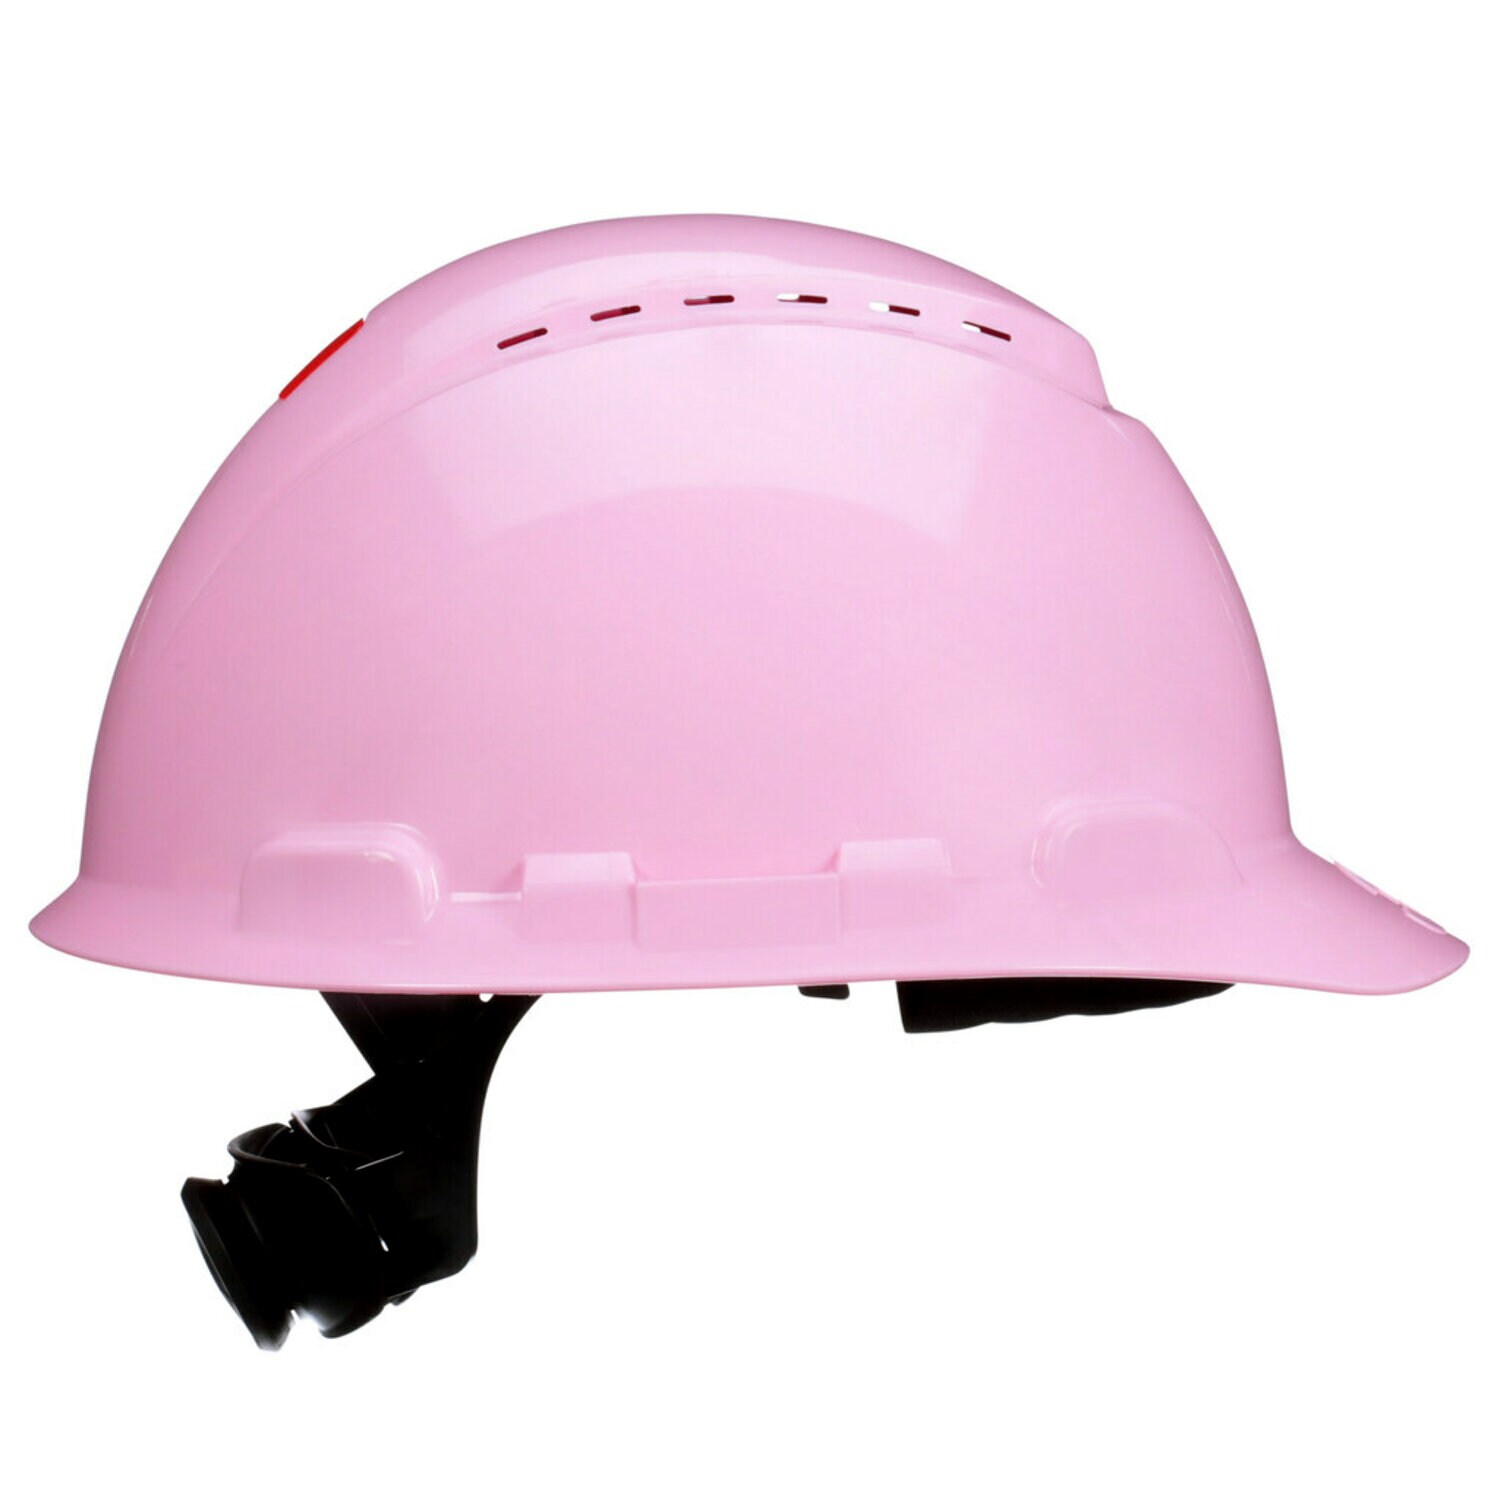 7100240026 - 3M SecureFit Hard Hat H-713SFV-UV, Pink, Vented, 4-Point Pressure Diffusion Ratchet Suspension, with Uvicator, 20 ea/Case